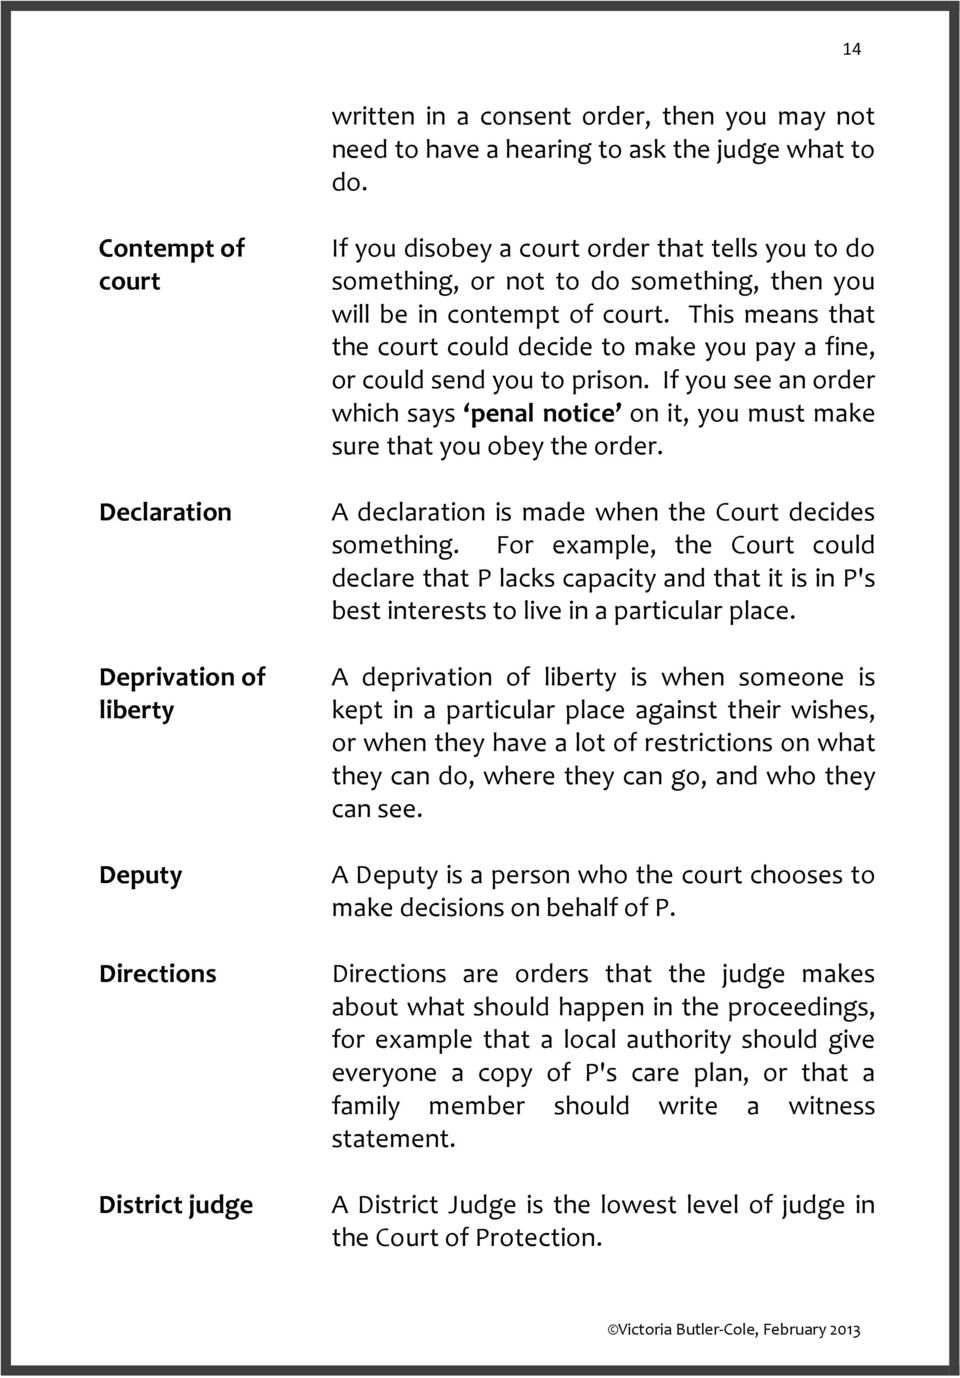 of court. This means that the court could decide to make you pay a fine, or could send you to prison. If you see an order which says penal notice on it, you must make sure that you obey the order.